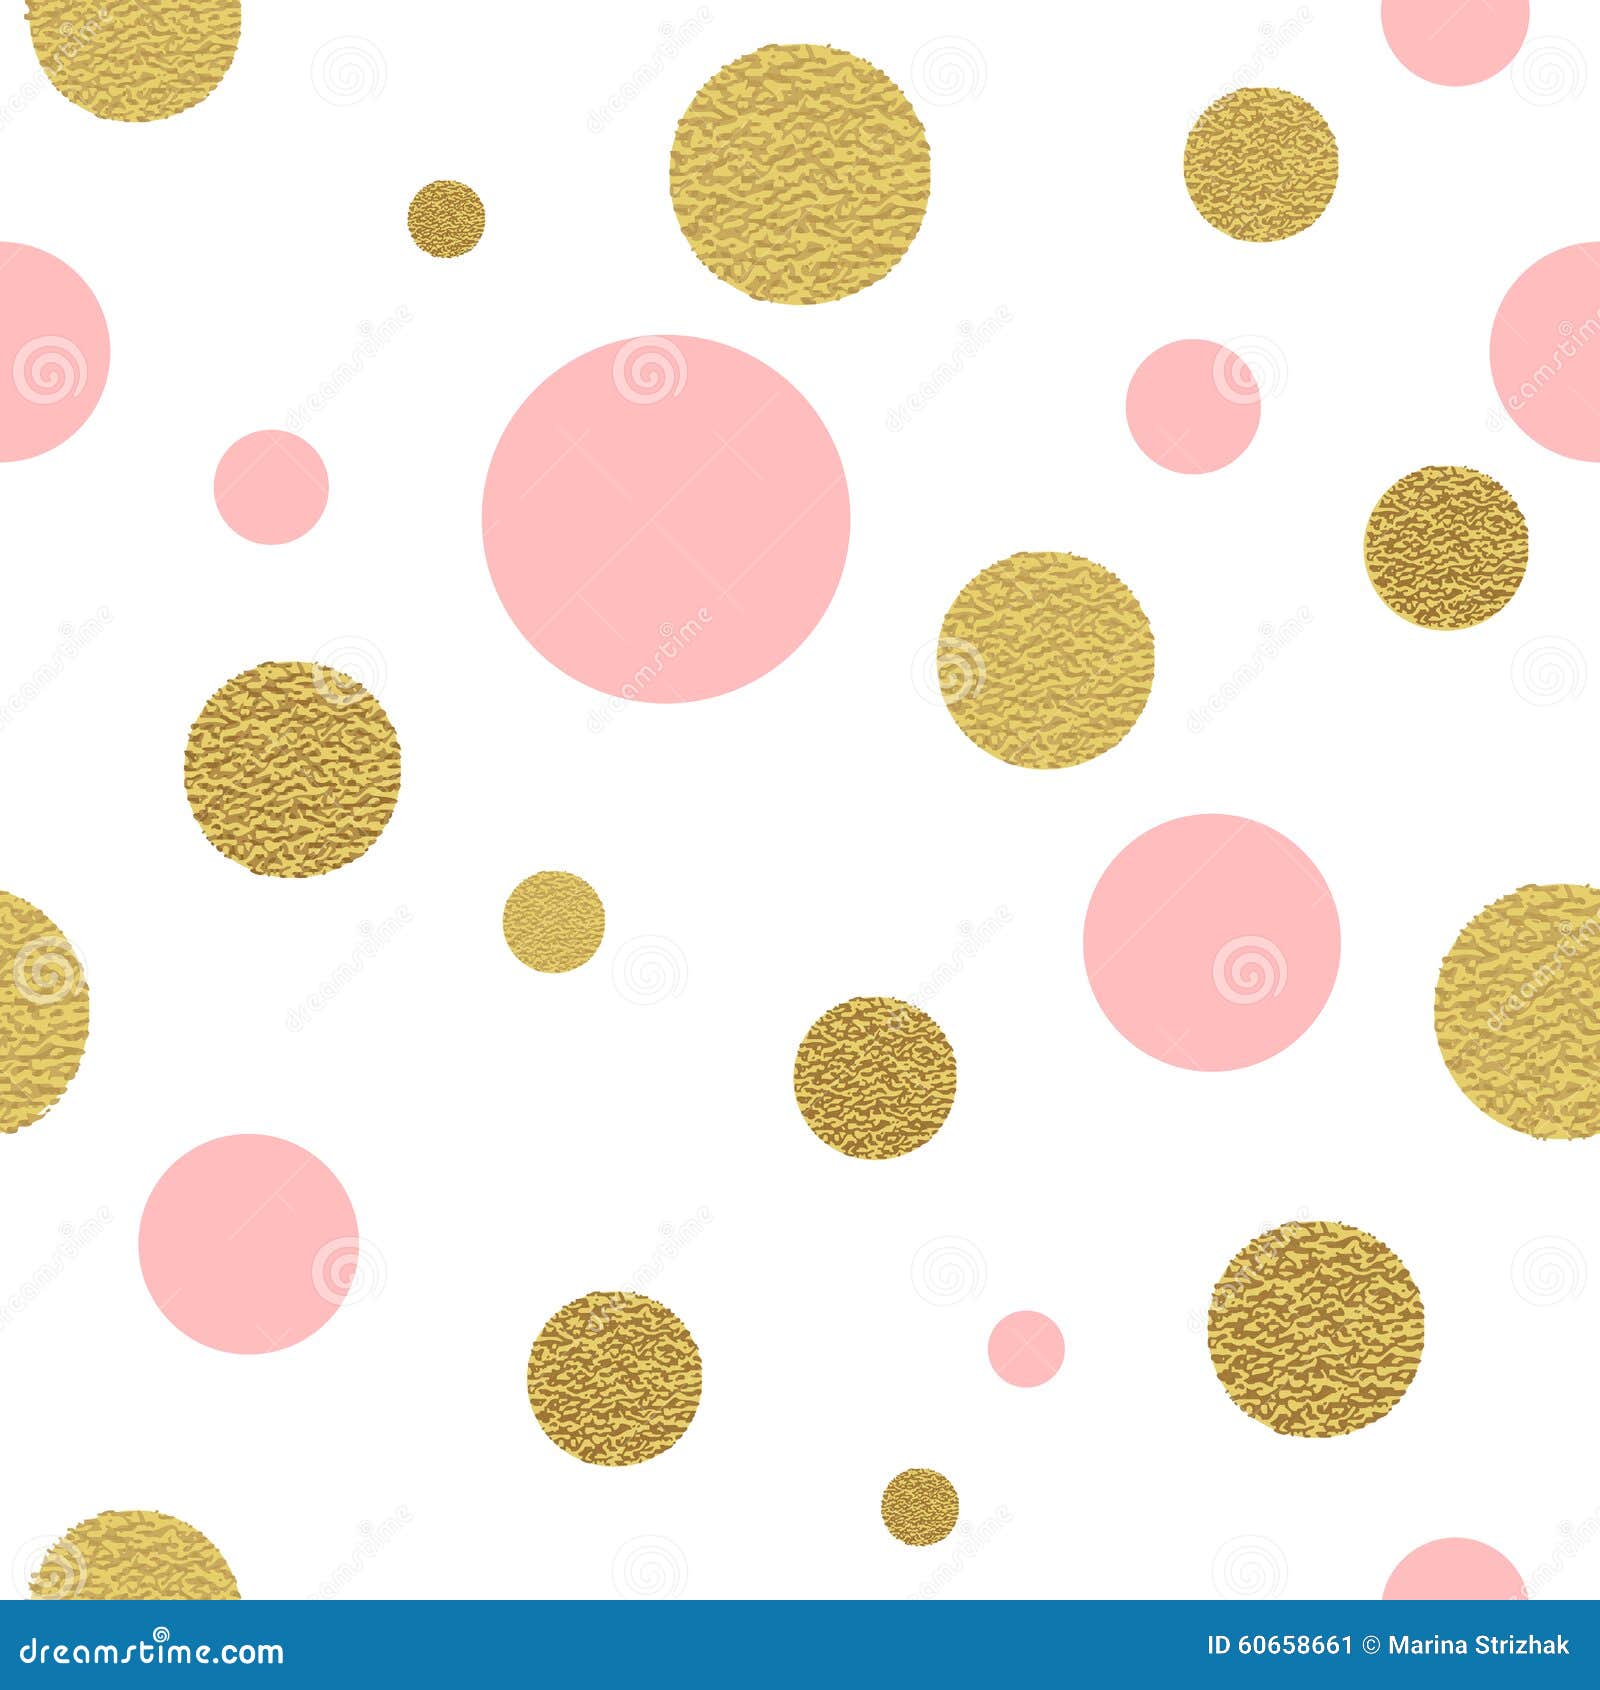 Classic Dotted Seamless Gold Glitter Pattern. Stock Vector ...